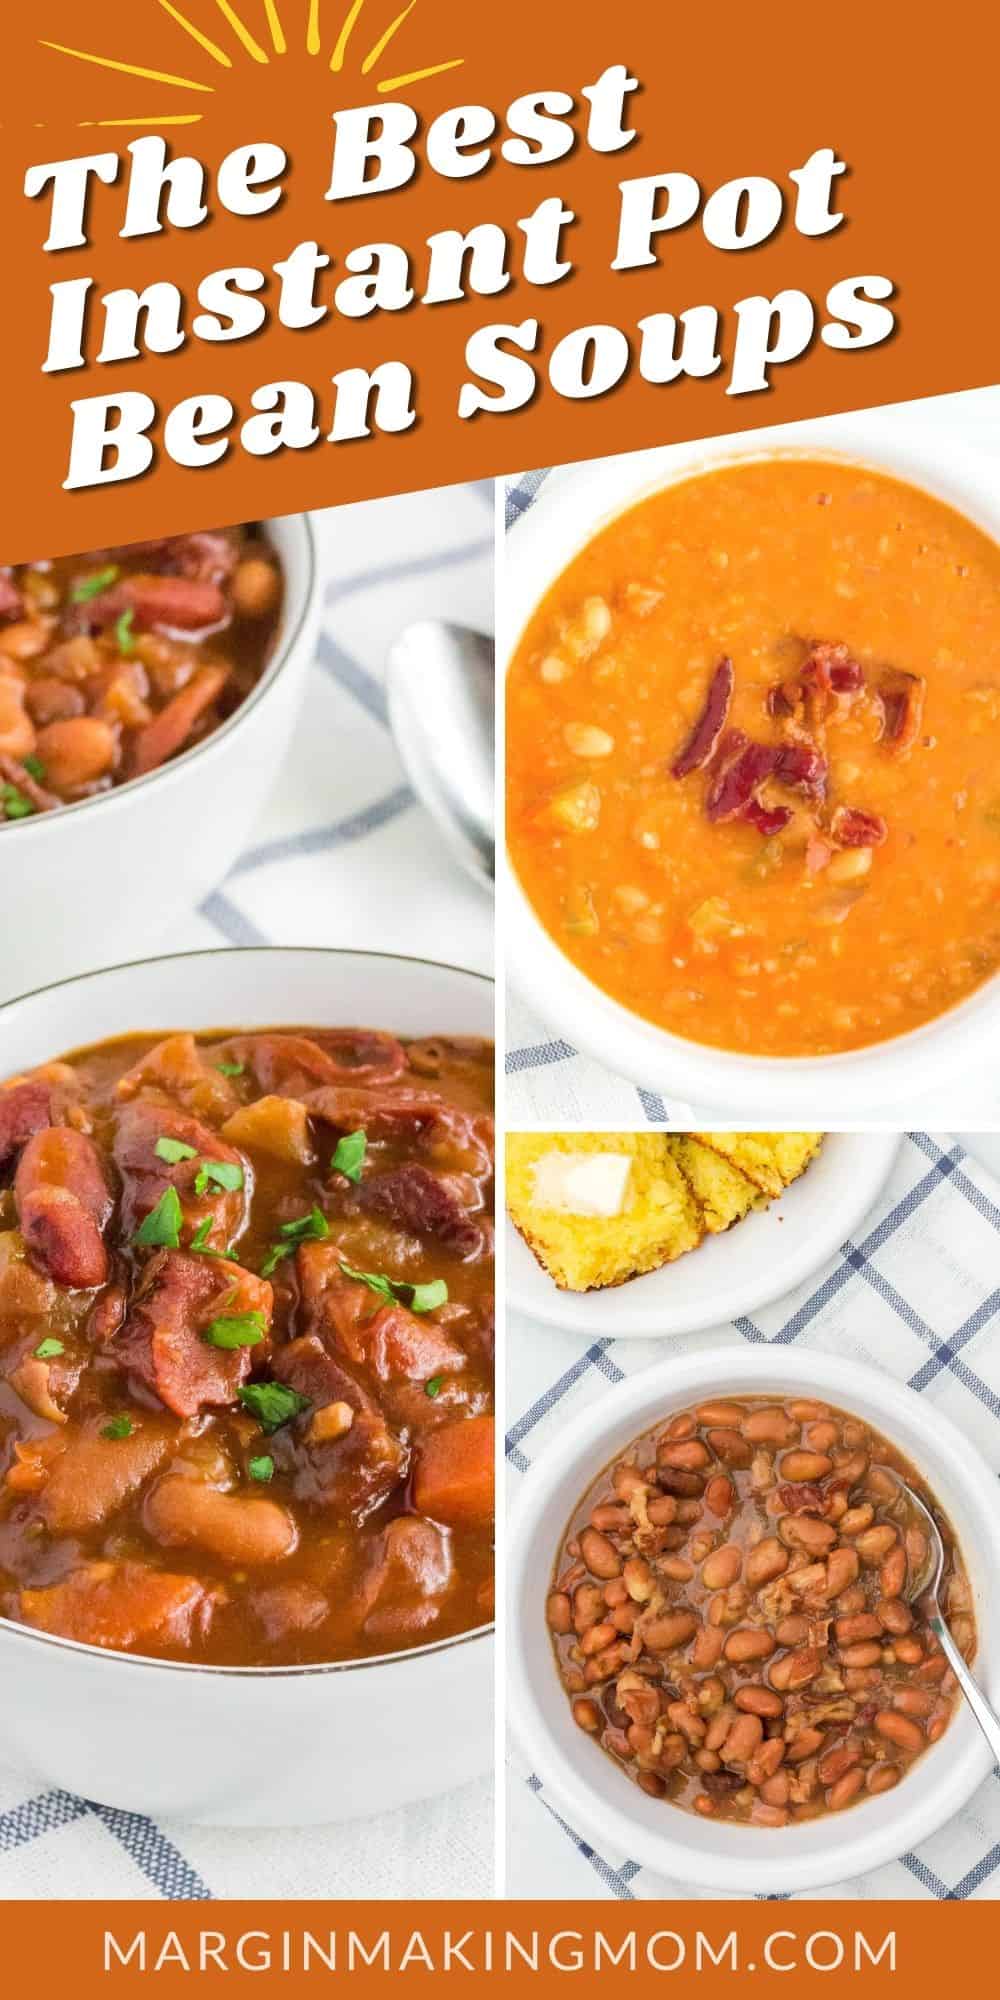 collage image featuring three photos of Instant Pot bean soup recipes.